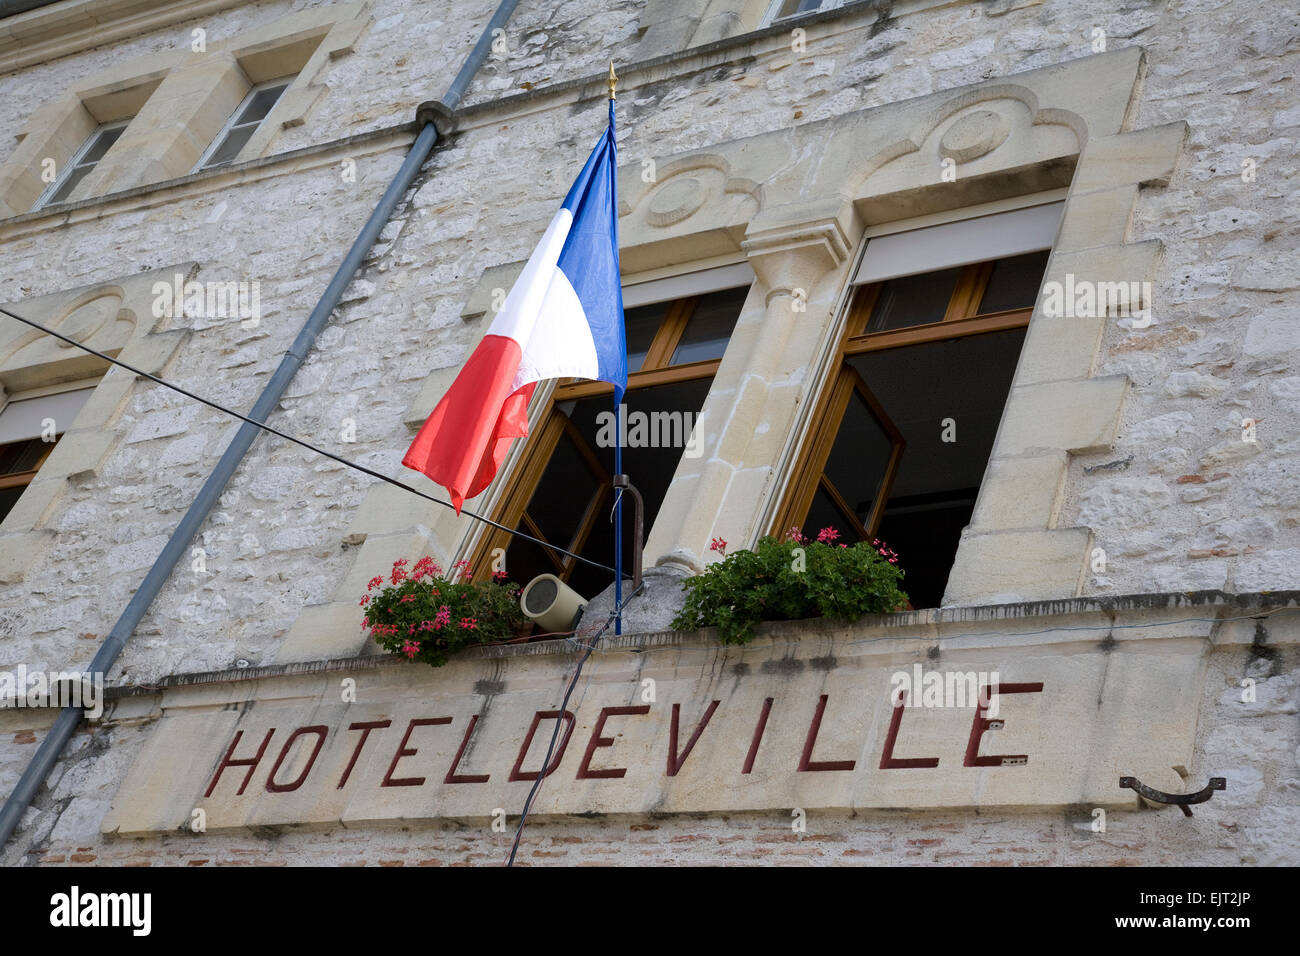 Close-up of the front facade of the Town Hall in Tournon-d'Agenais, France, with the tricolore flying from the wall mounted flag Stock Photo